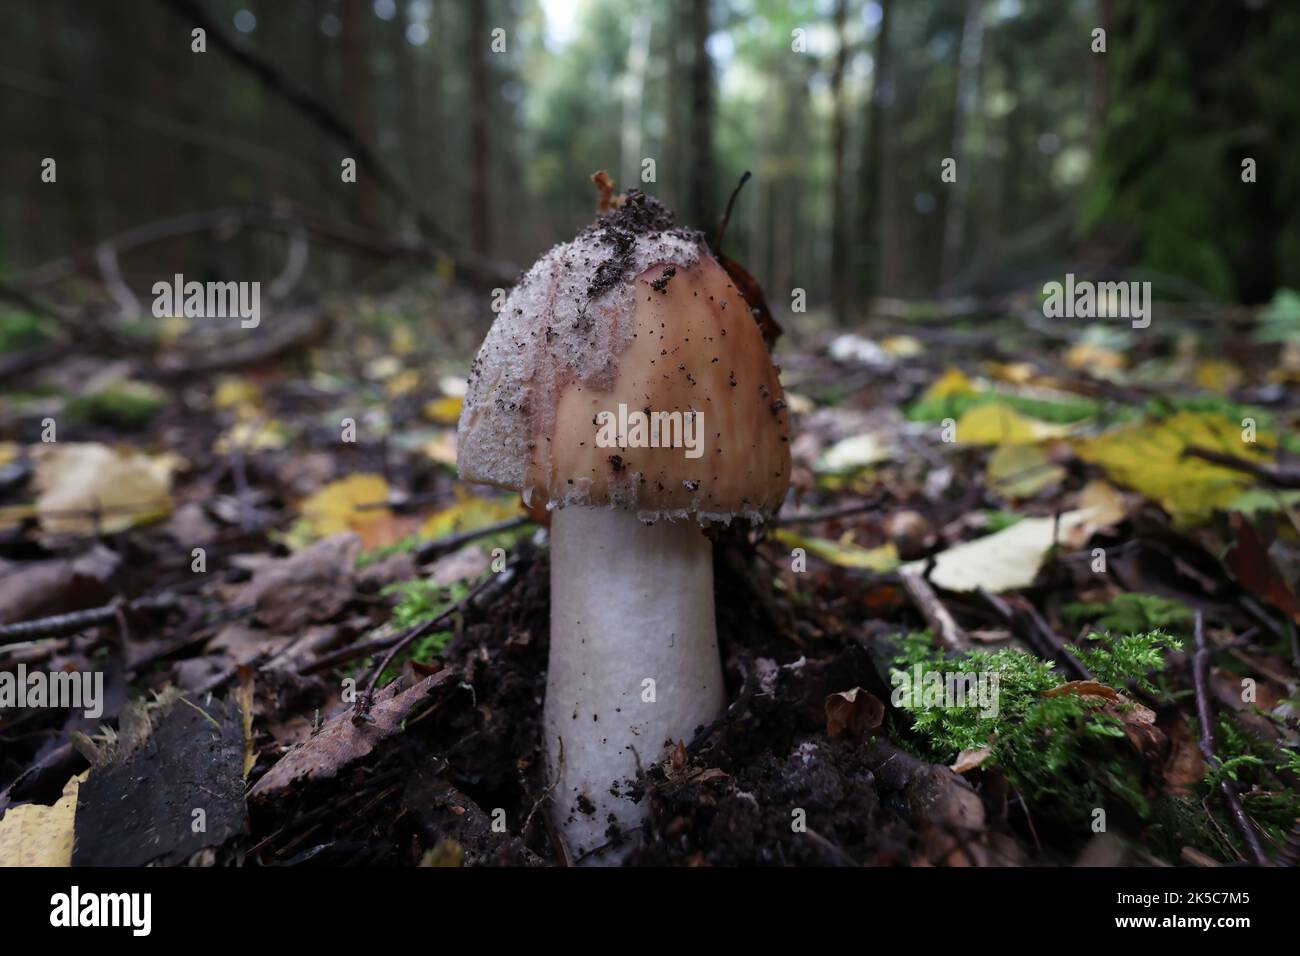 Young pearl mushroom grows in the forest Stock Photo